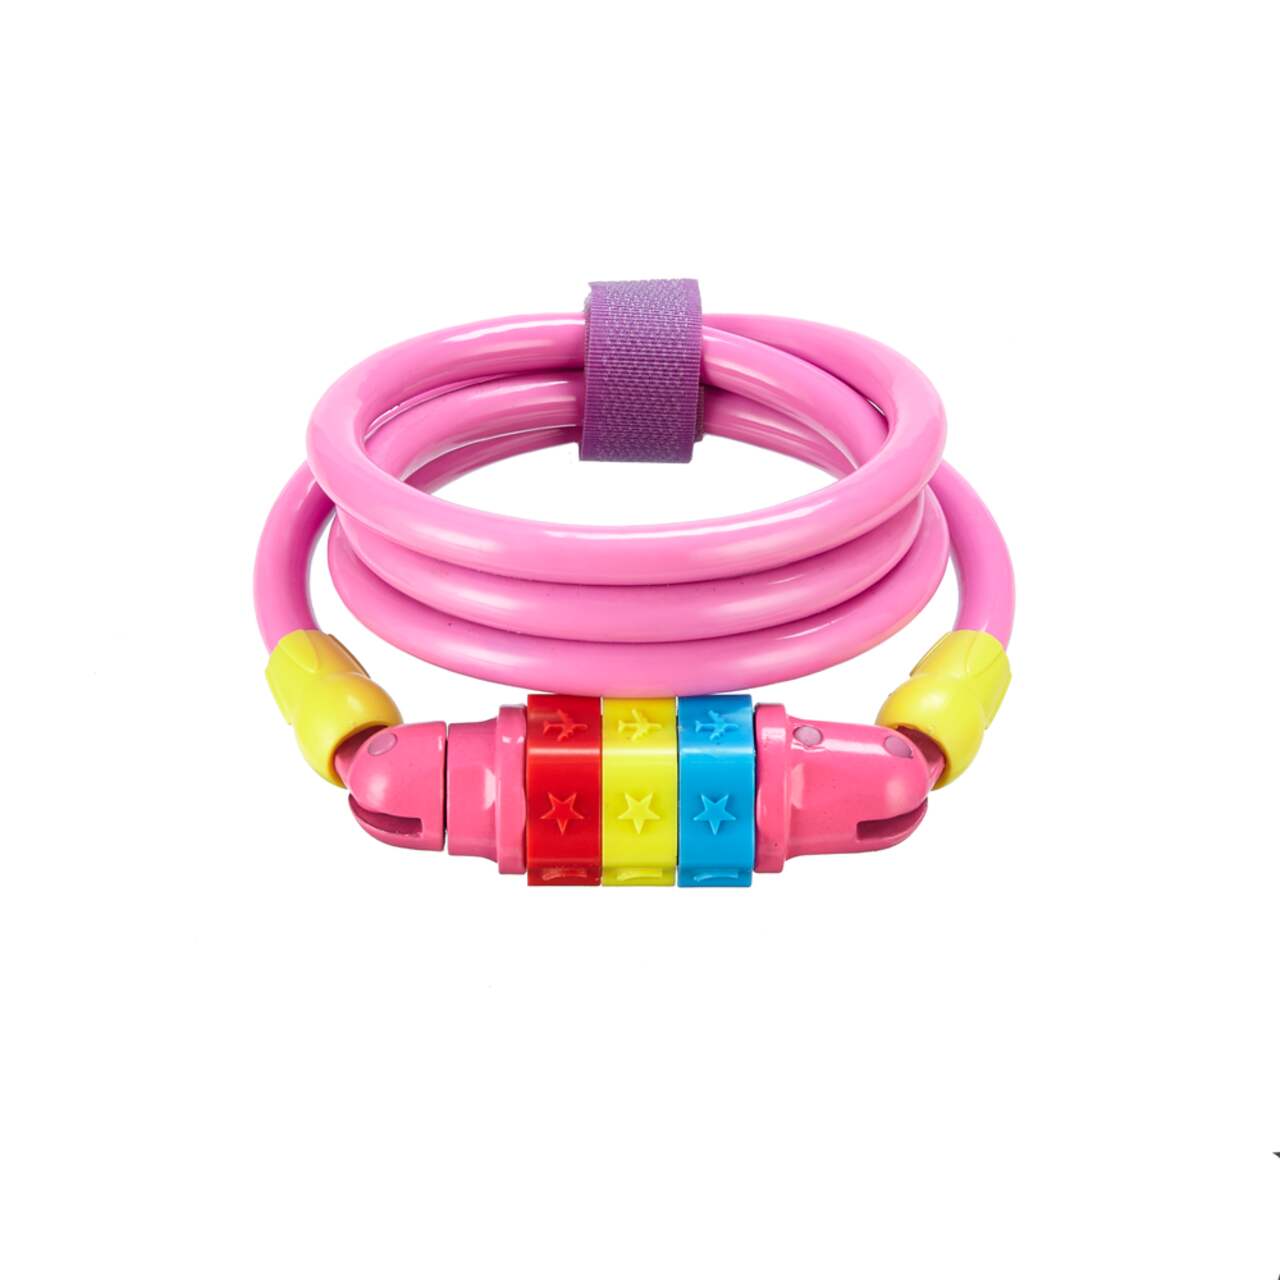 https://media-www.canadiantire.ca/product/playing/cycling/bicycle-accessories/0730085/supercycle-kids-combo-cable-lock-pink-2348d3a7-1d8f-4183-a16c-dbb91cd035ba.png?imdensity=1&imwidth=640&impolicy=mZoom